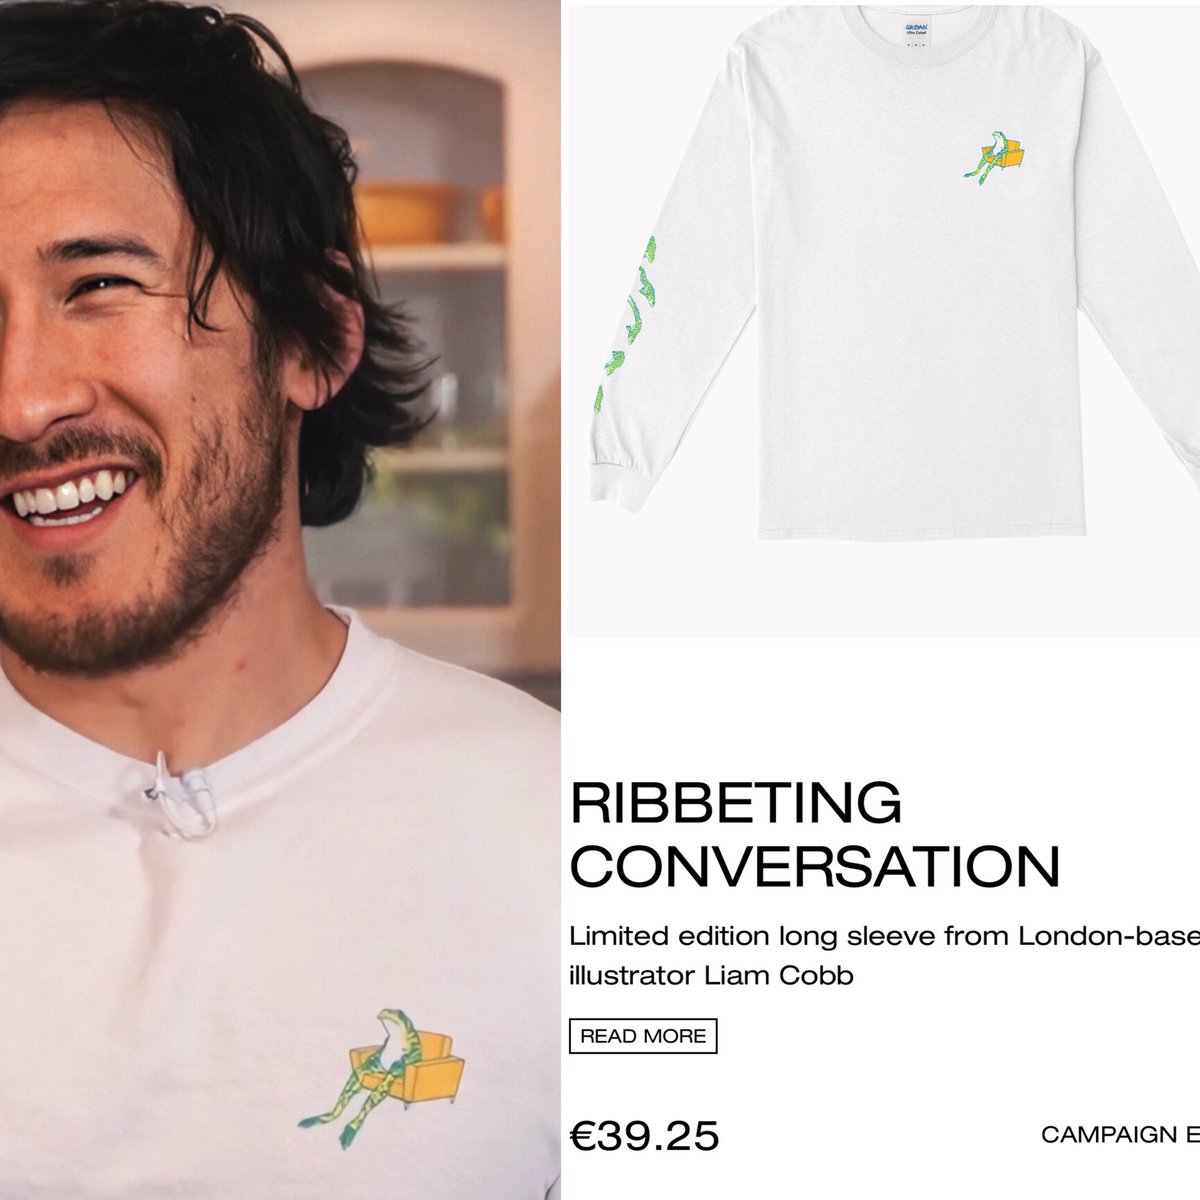 Let’s kick off this thread with a banger: this ‘ribbeting conversation’ longsleeve with frogs all over it! Mark wore this recently. it’s a limited edition shirt and is no longer being sold unfortunately. Here’s the link,it might come back one day!  https://everpress.com/ribbeting-conversation